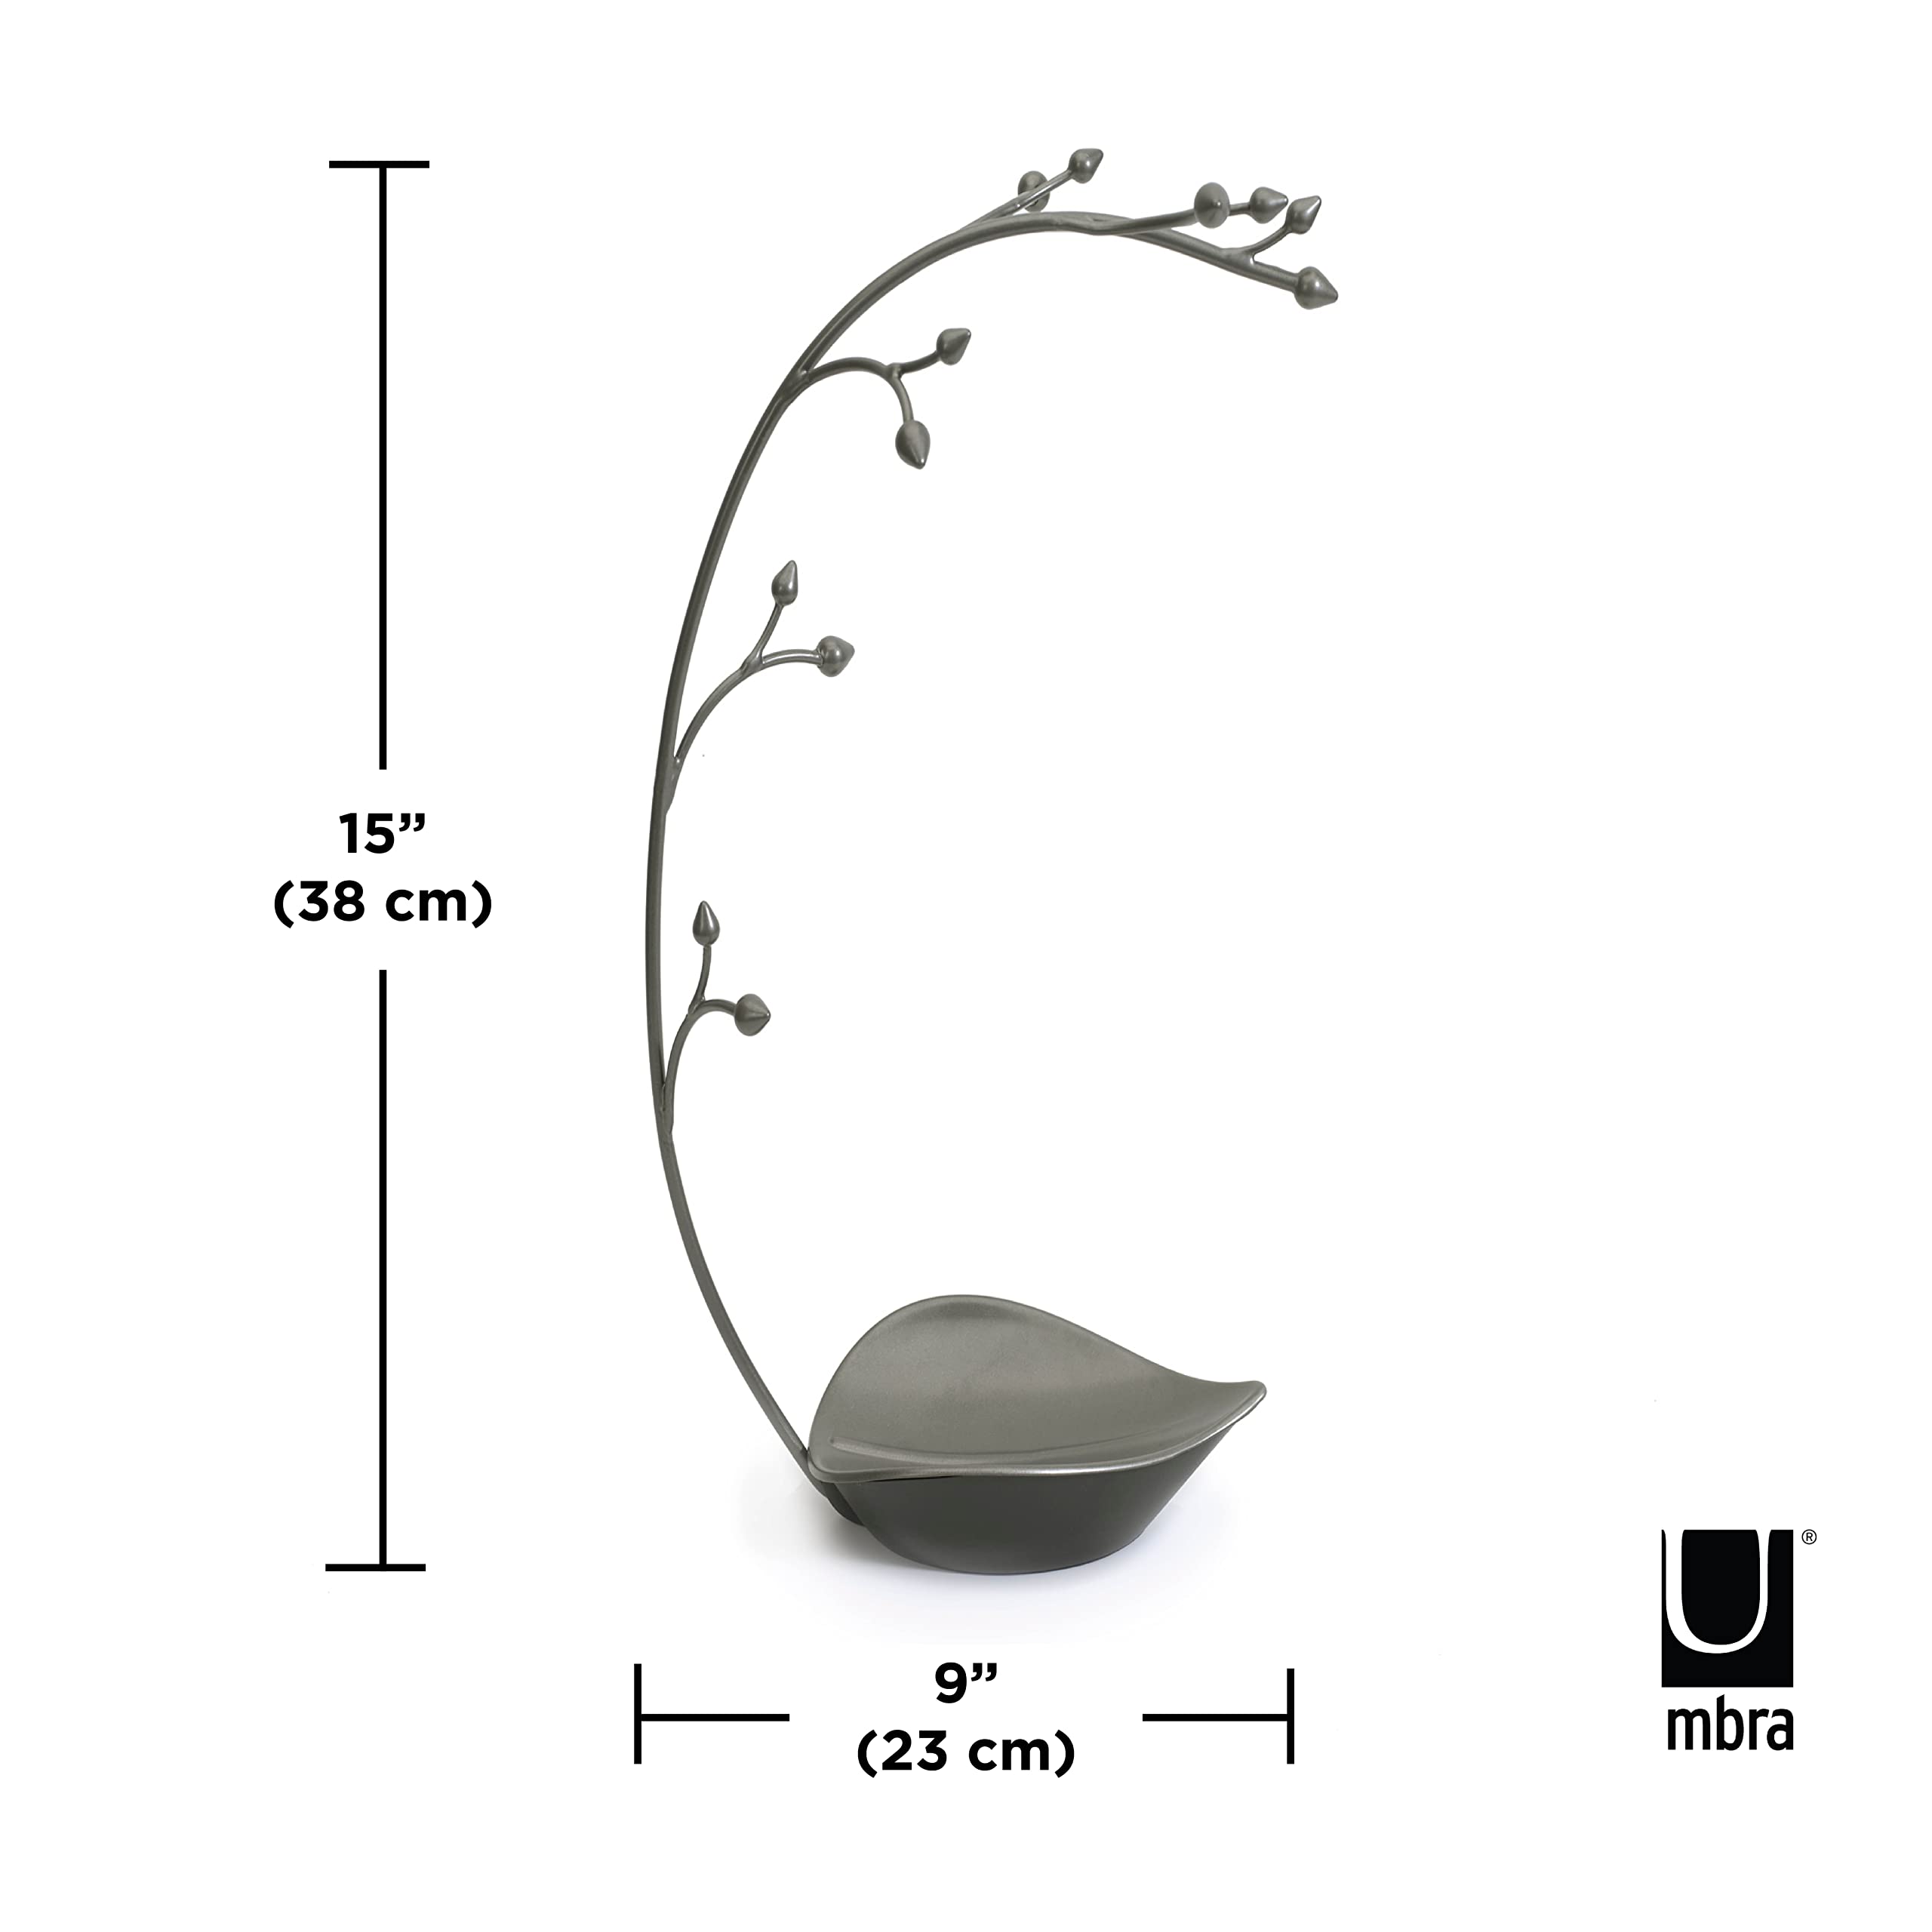 Umbra Orchid Jewelry Hanging Tree Stand - Multi-Functional Necklace Holder Display Organizer Rack With a Ring Dish Tray, Gun Metal, 15